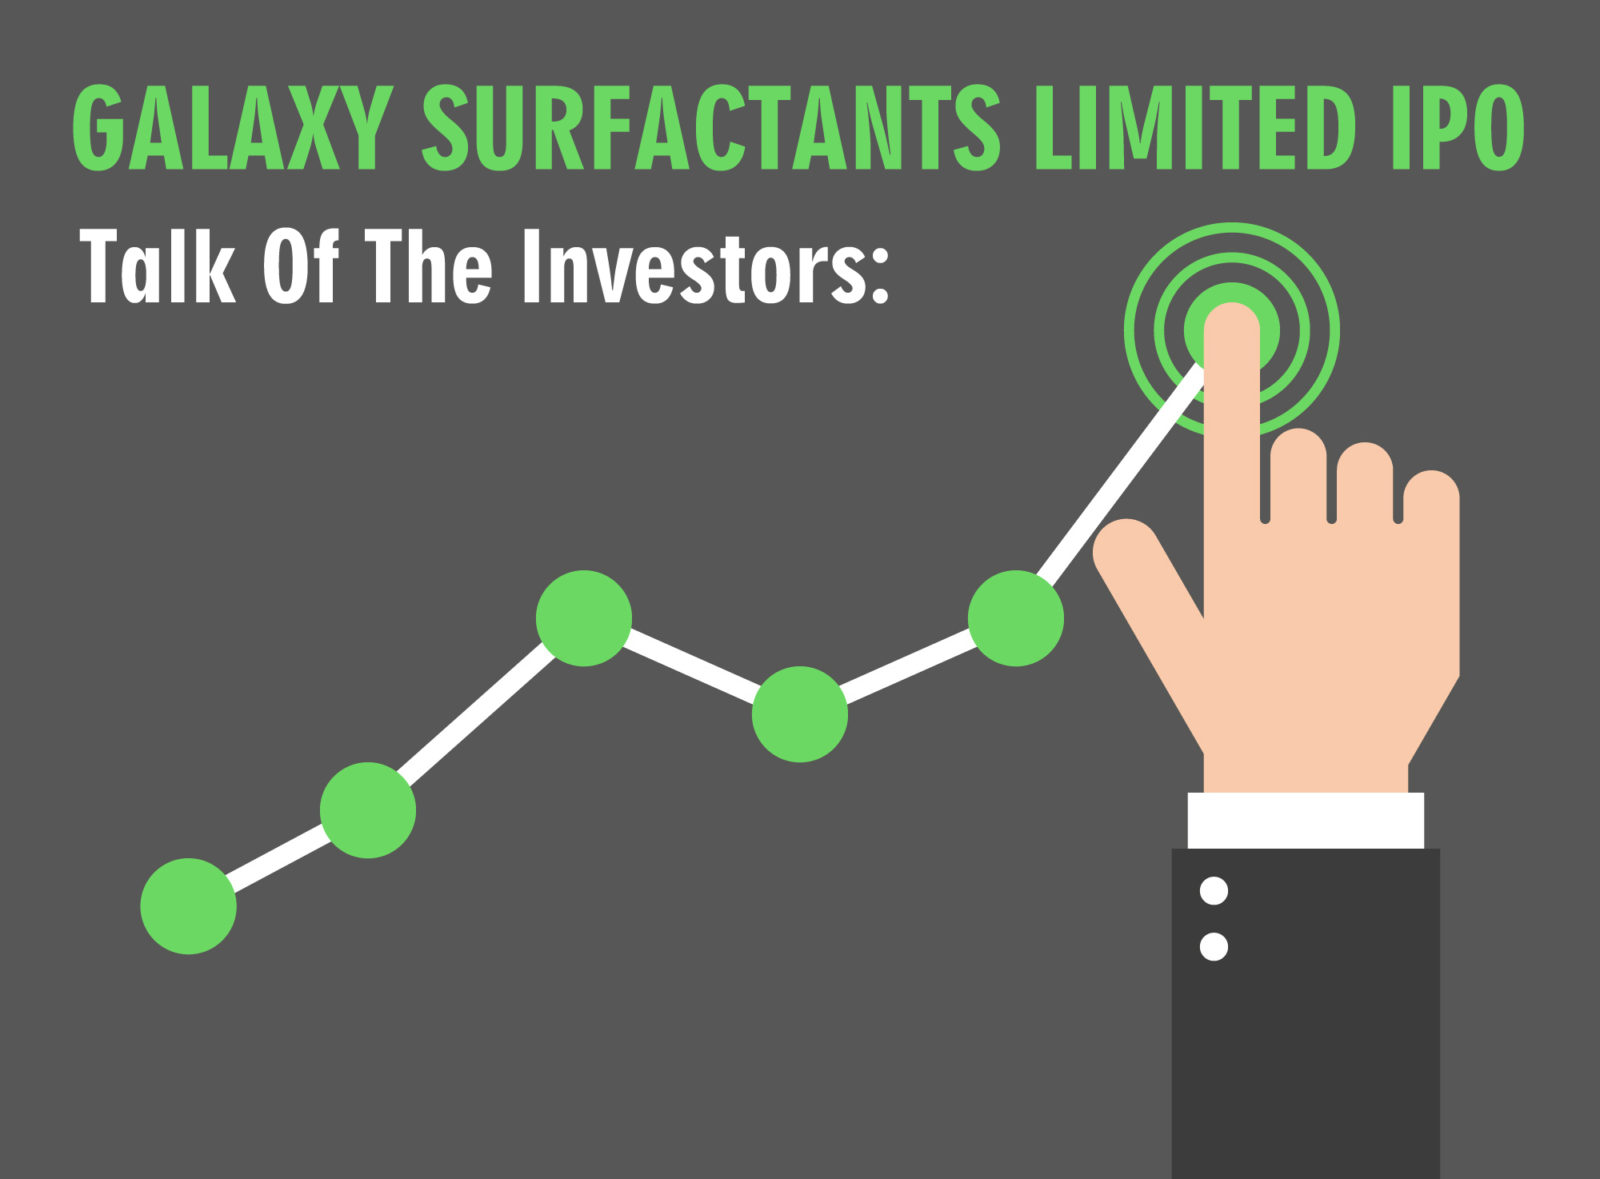 GALAXY SURFACTANTS LIMITED IPO